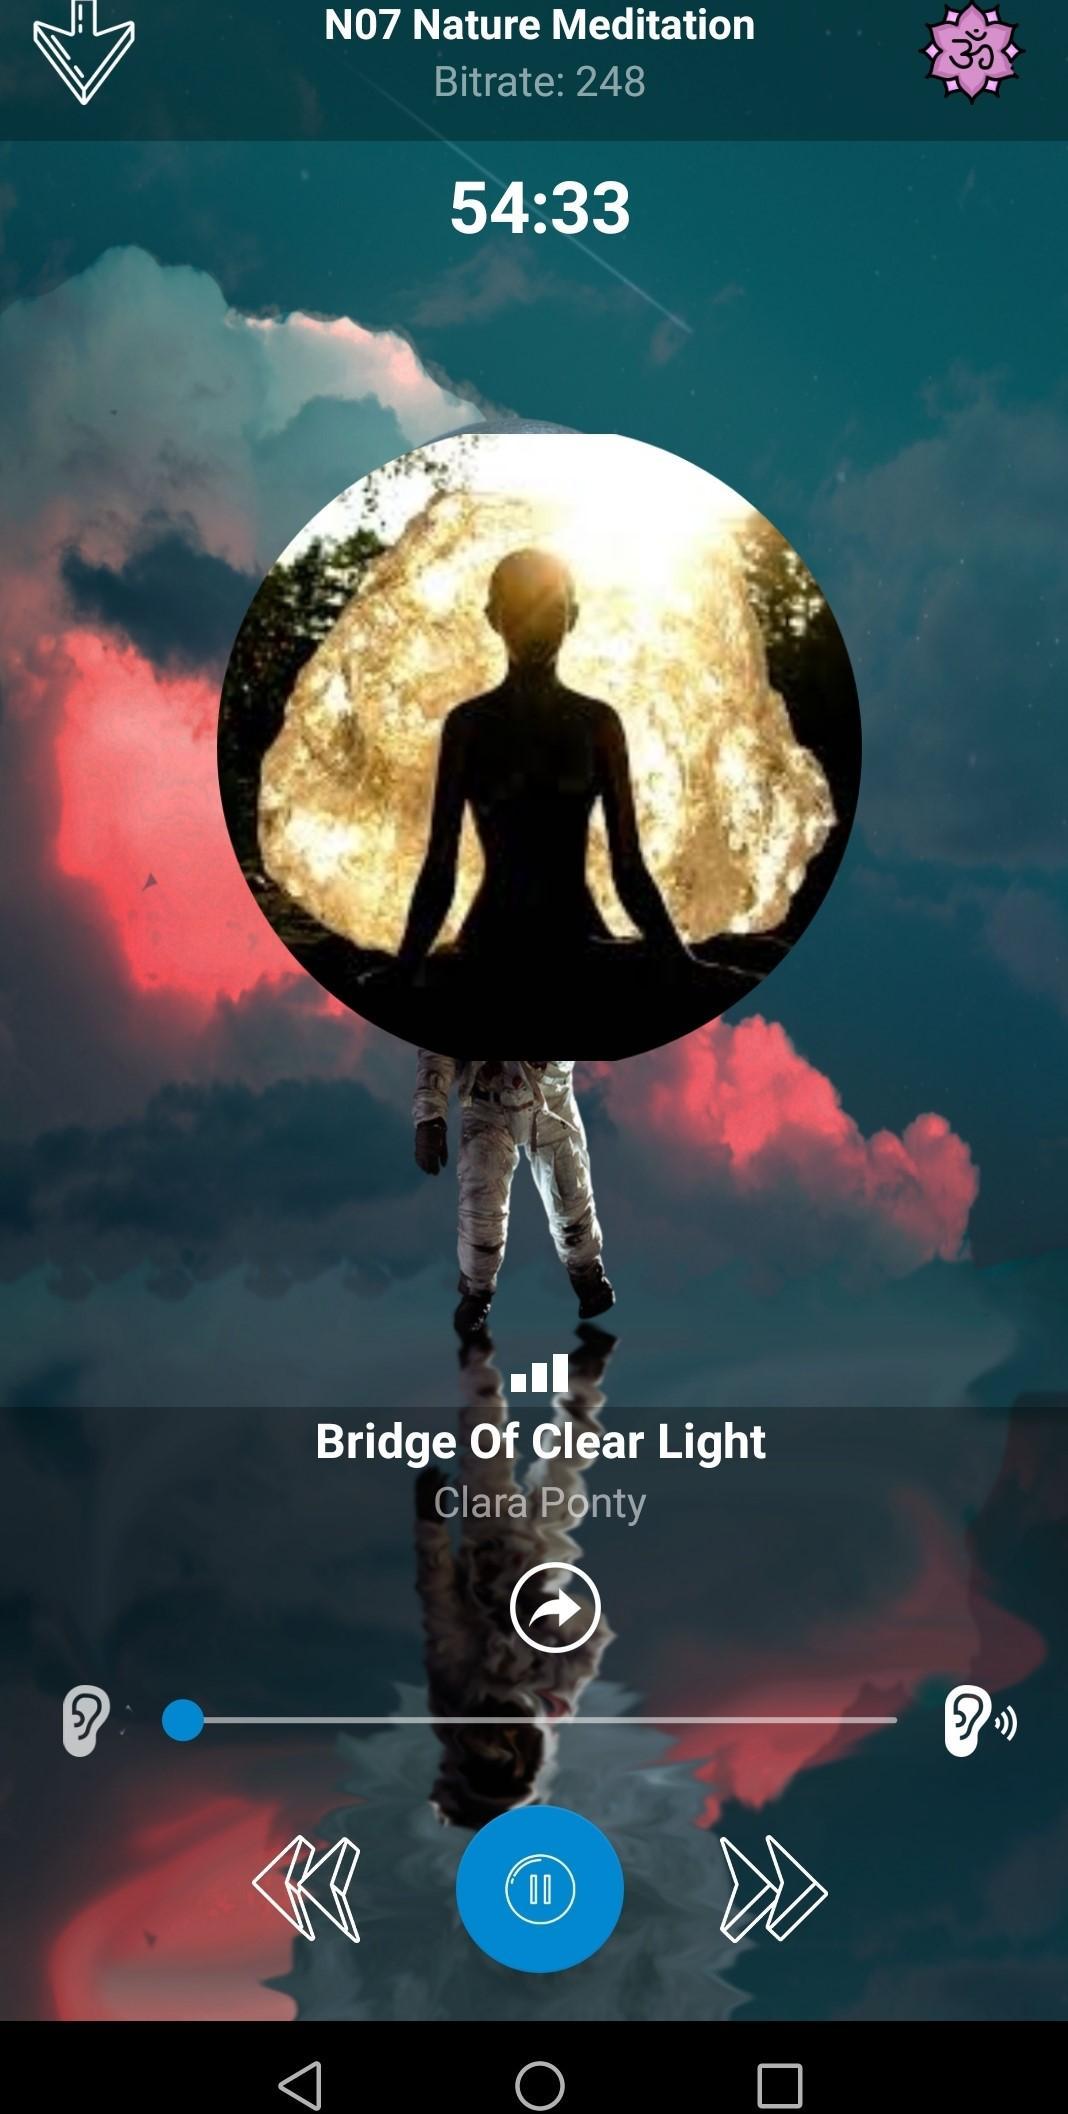 Meditation Music Radio for Android - APK Download